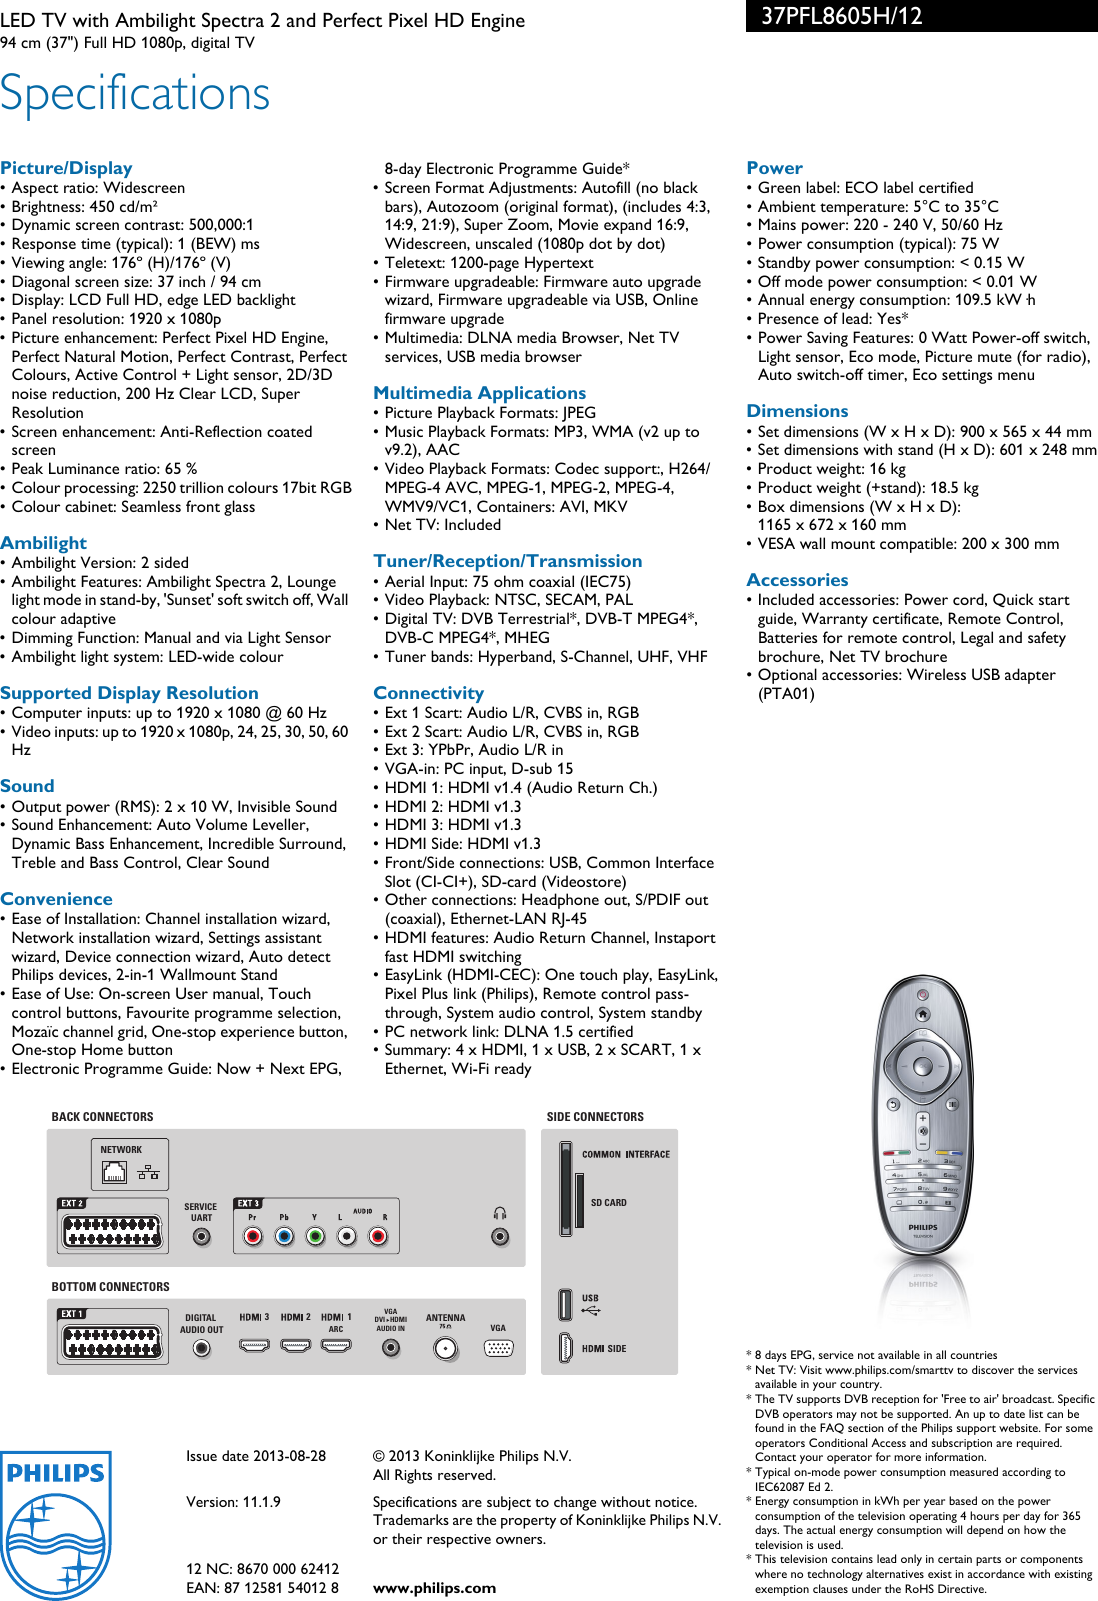 Page 3 of 3 - Philips 37PFL8605H/12 Leaflet 37PFL8605H_12 Released United Kingdom (English)  User Manual 37pfl8605h 12 Pss Enggb